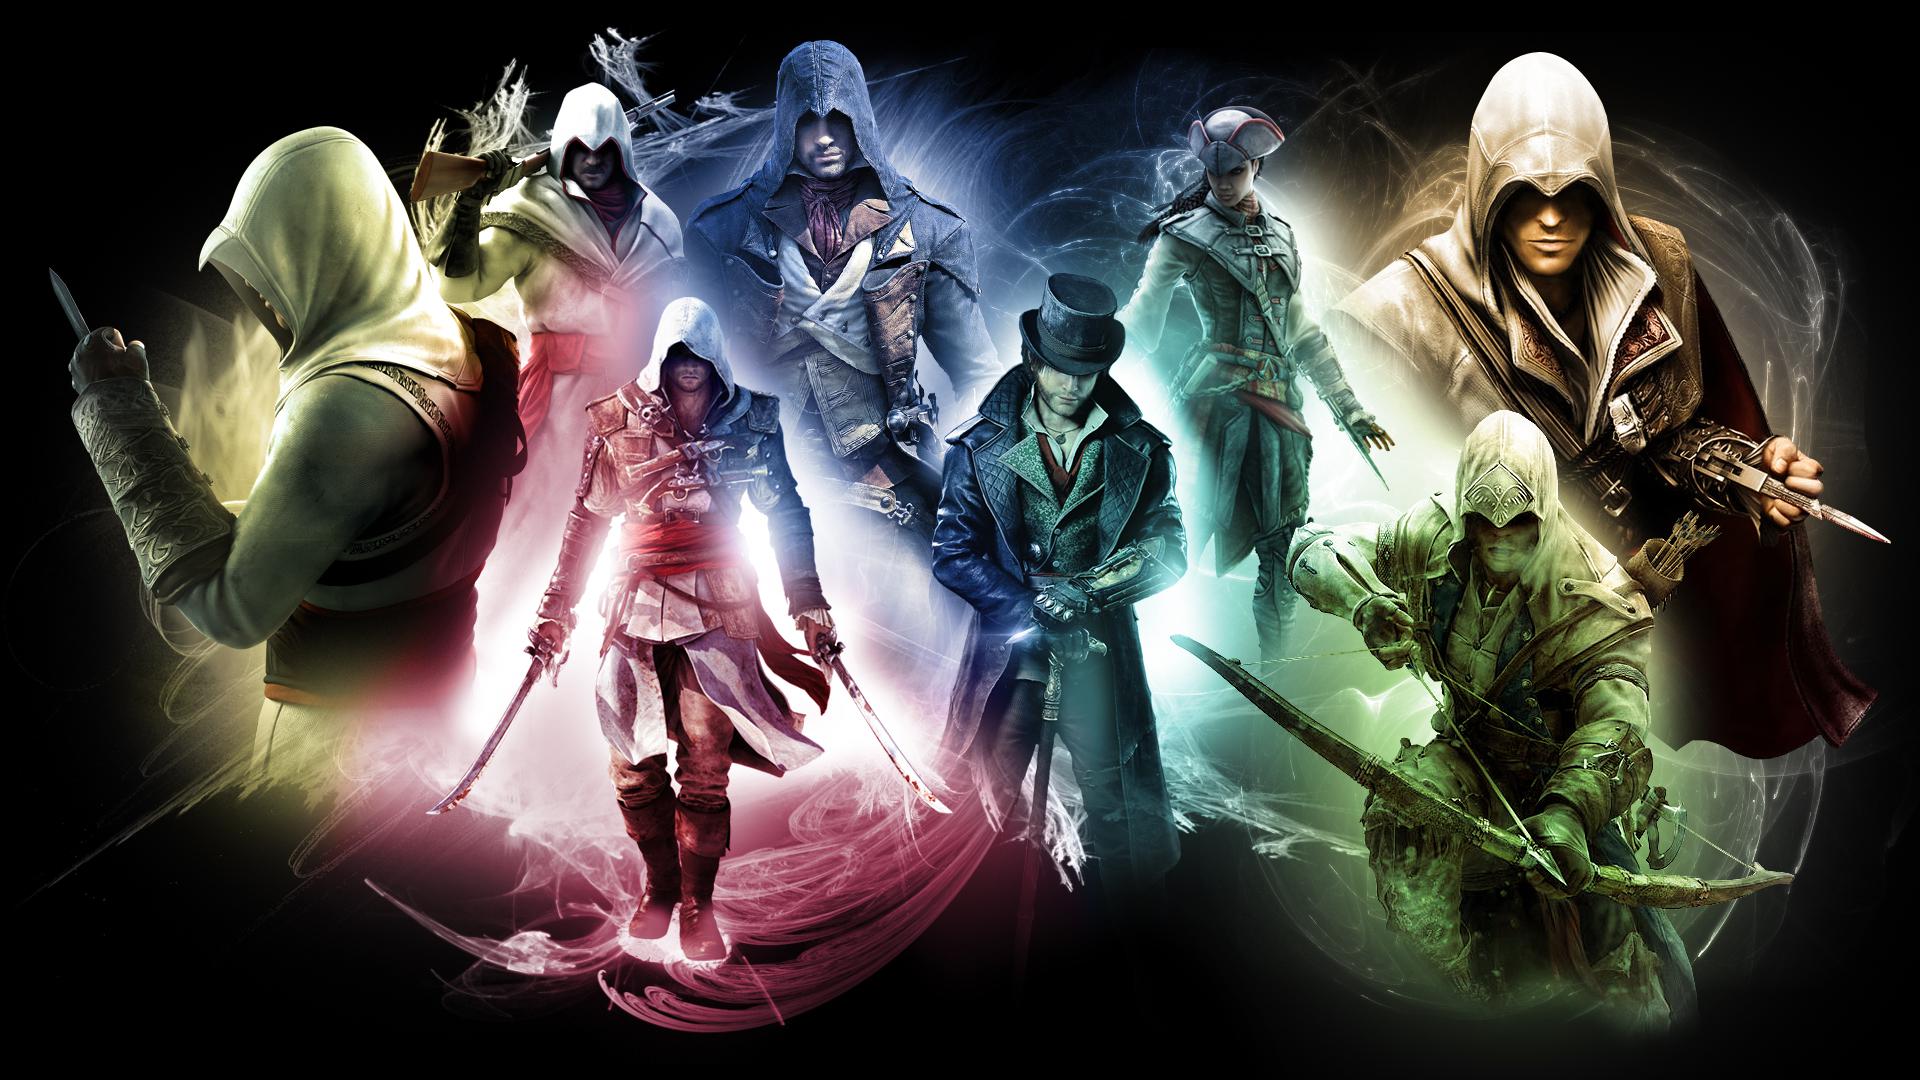 Wallpaper the hood, Assassin's Creed, Assassin for mobile and desktop,  section игры, resolution 2560x1600 - download